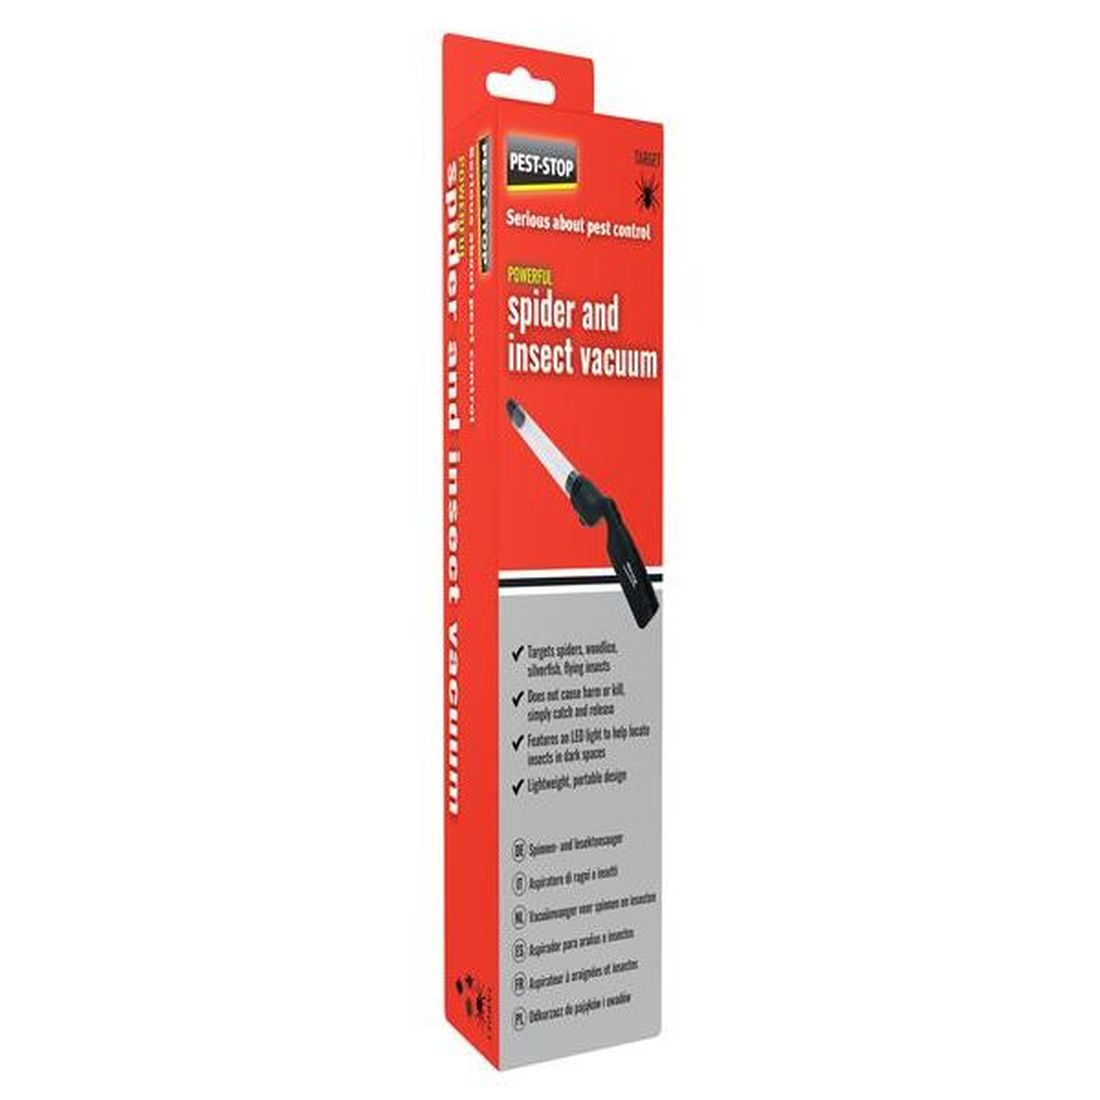 Pest-Stop Spider & Insect Vacuum            